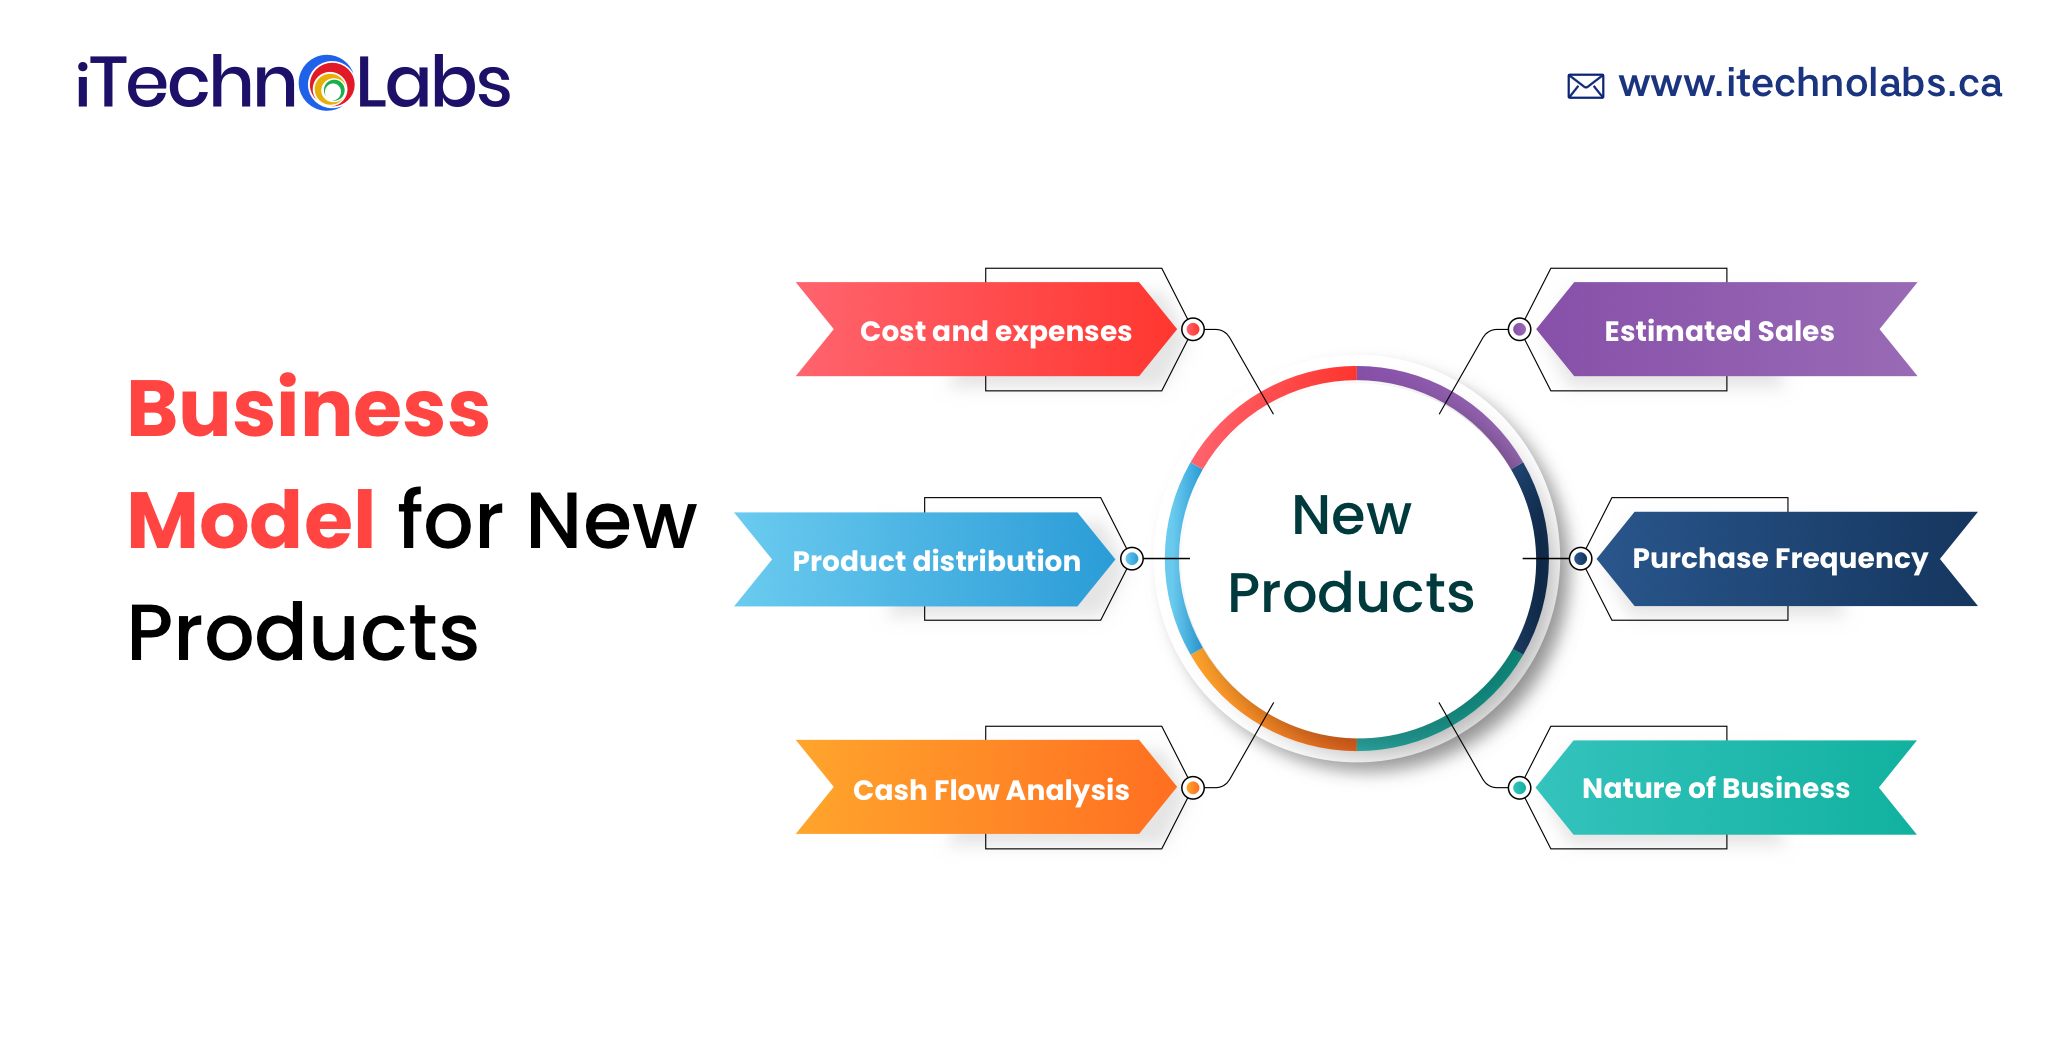 business model for new products itechnolabs